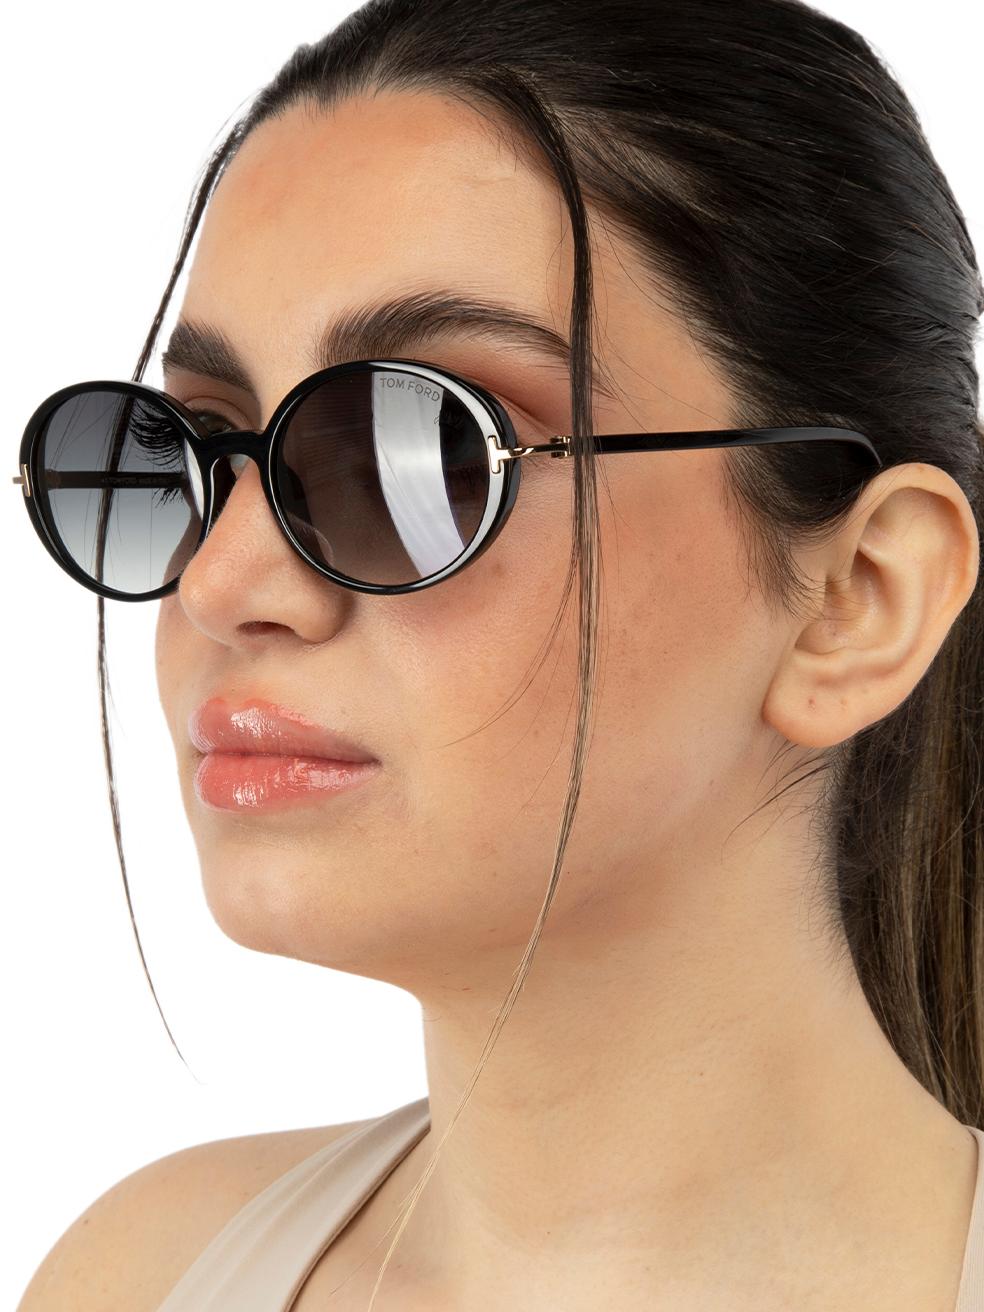 CONDITION is New with tags on this brand new Tom Ford designer item. This item comes with original packaging.
 
 
 
 Details
 
 
 Model: FT0922
 
 Shiny Black
 
 Acetate
 
 Oval Sunglasses
 
 Gradient Smoke Lens
 
 Full-Rim
 
 100% UV protection
 
